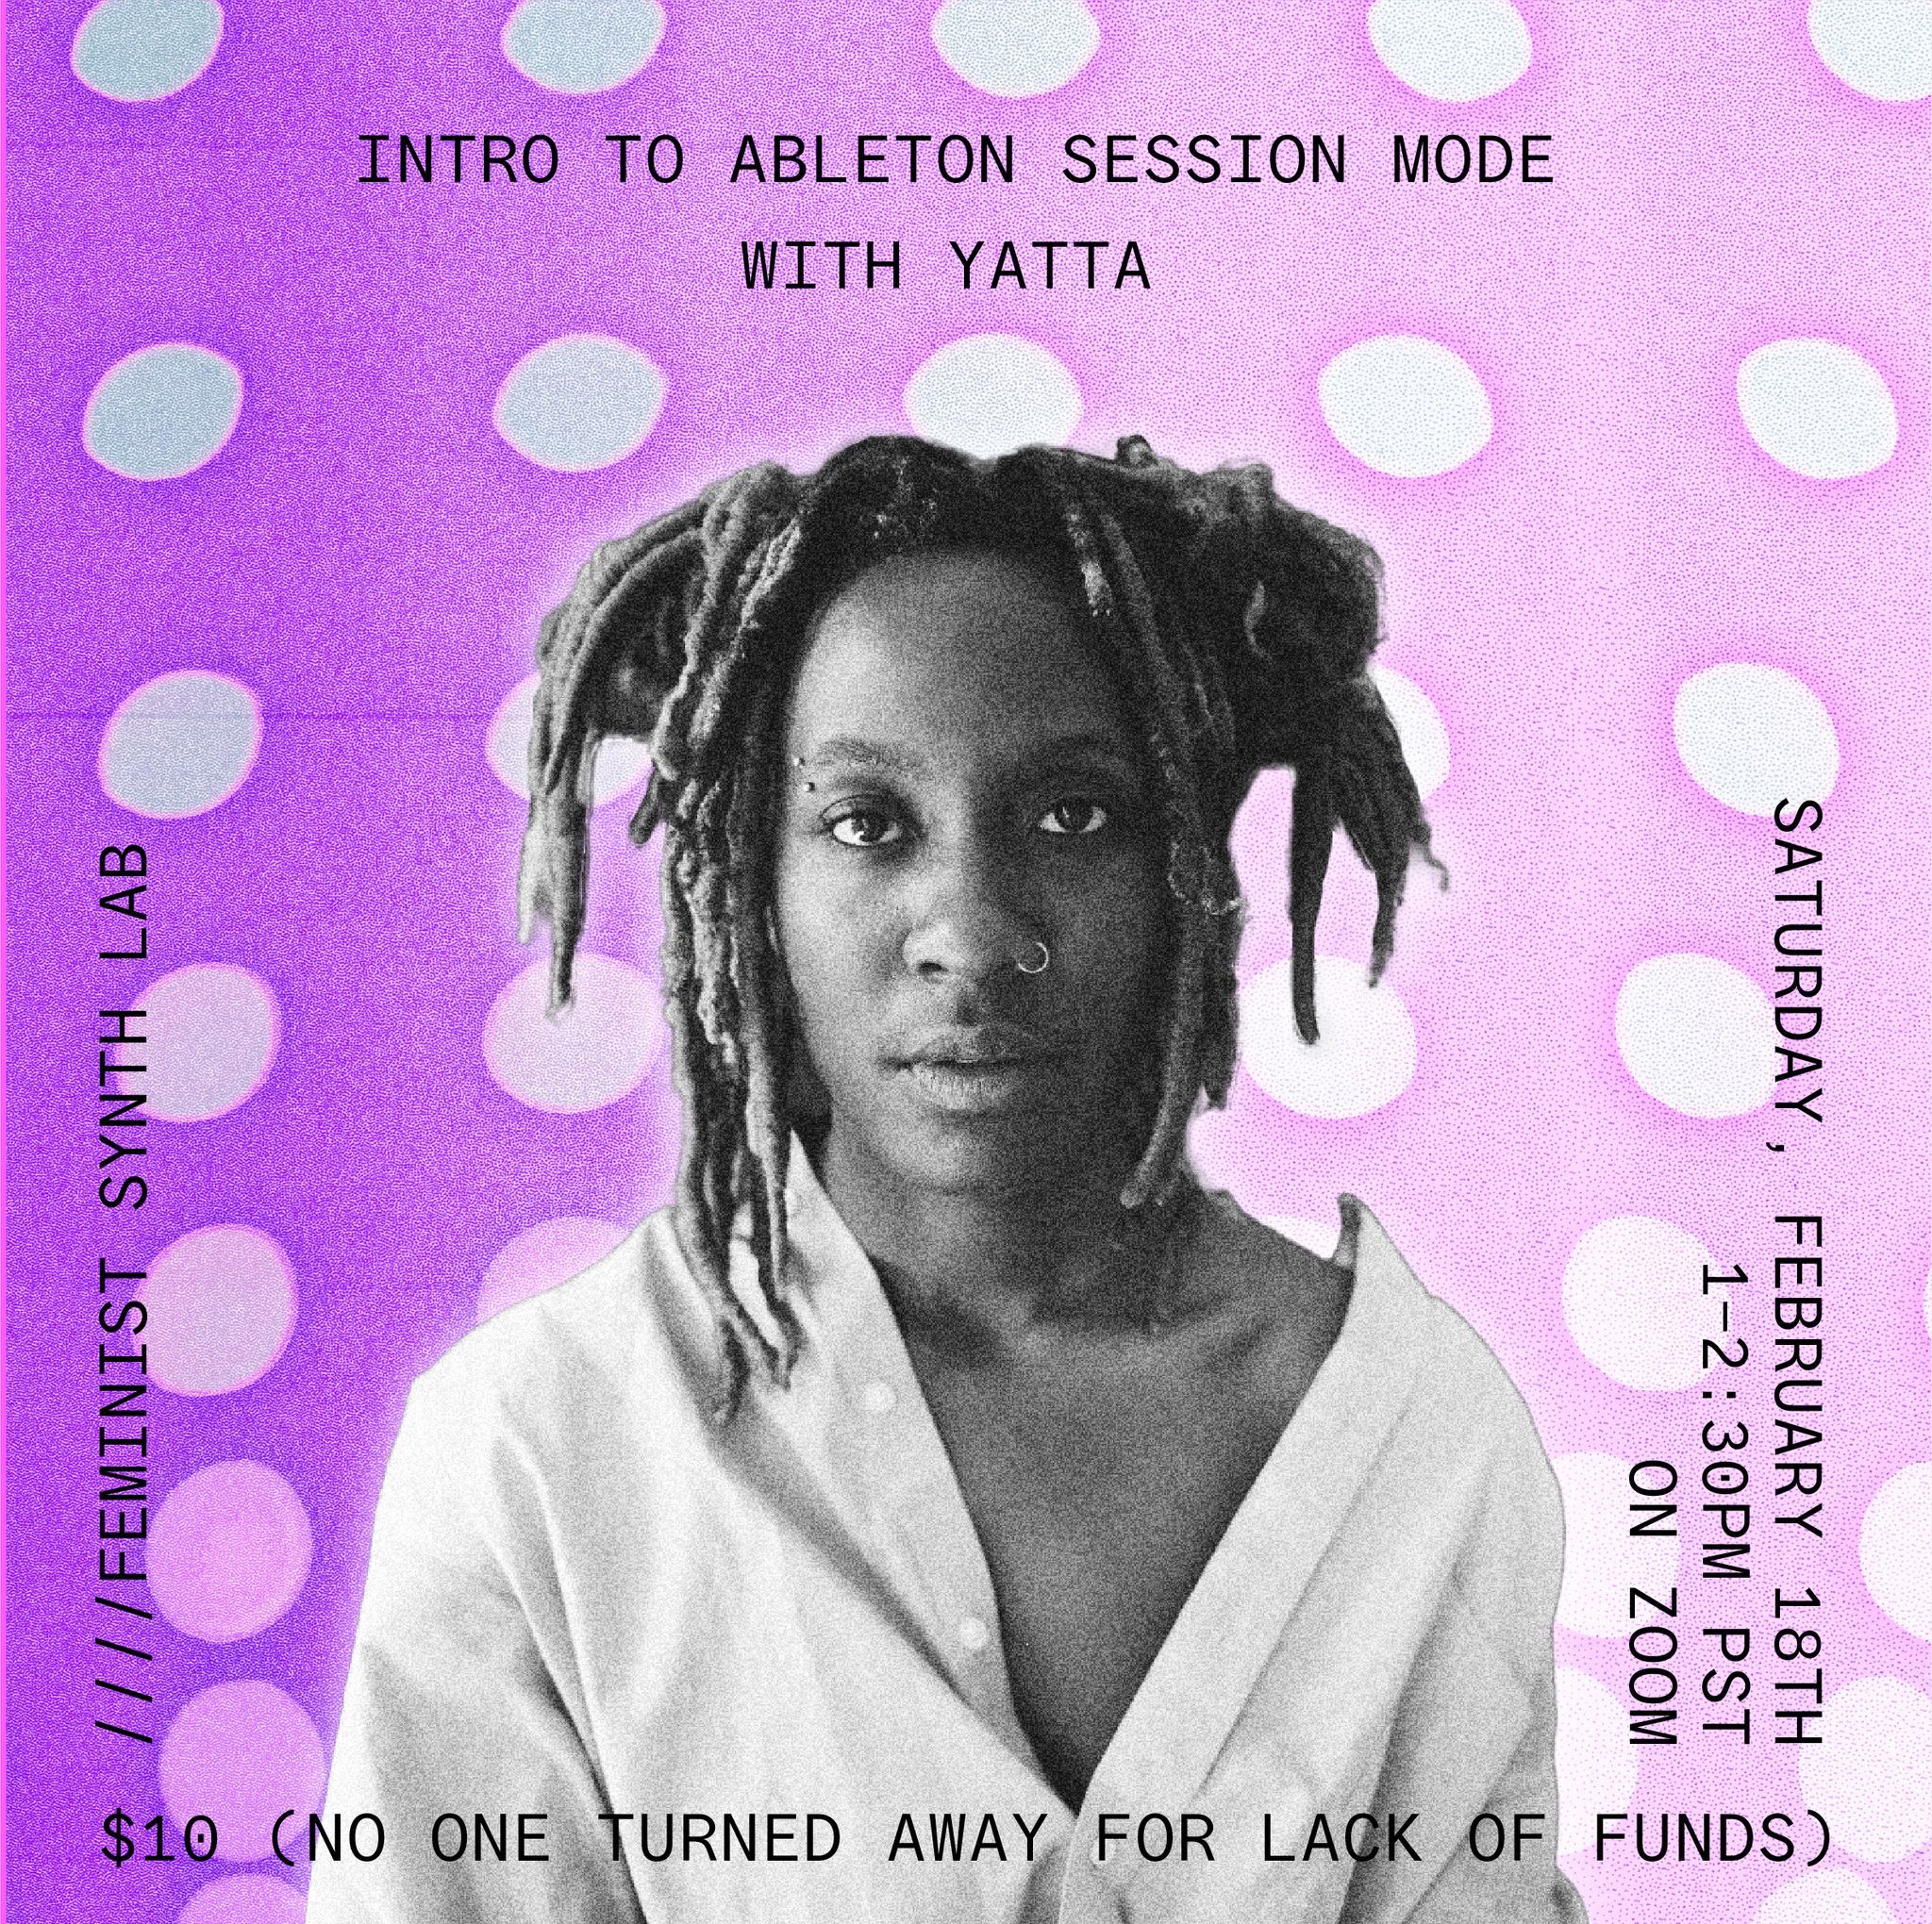 "Intro to Ableton Session Mode with Yatta"